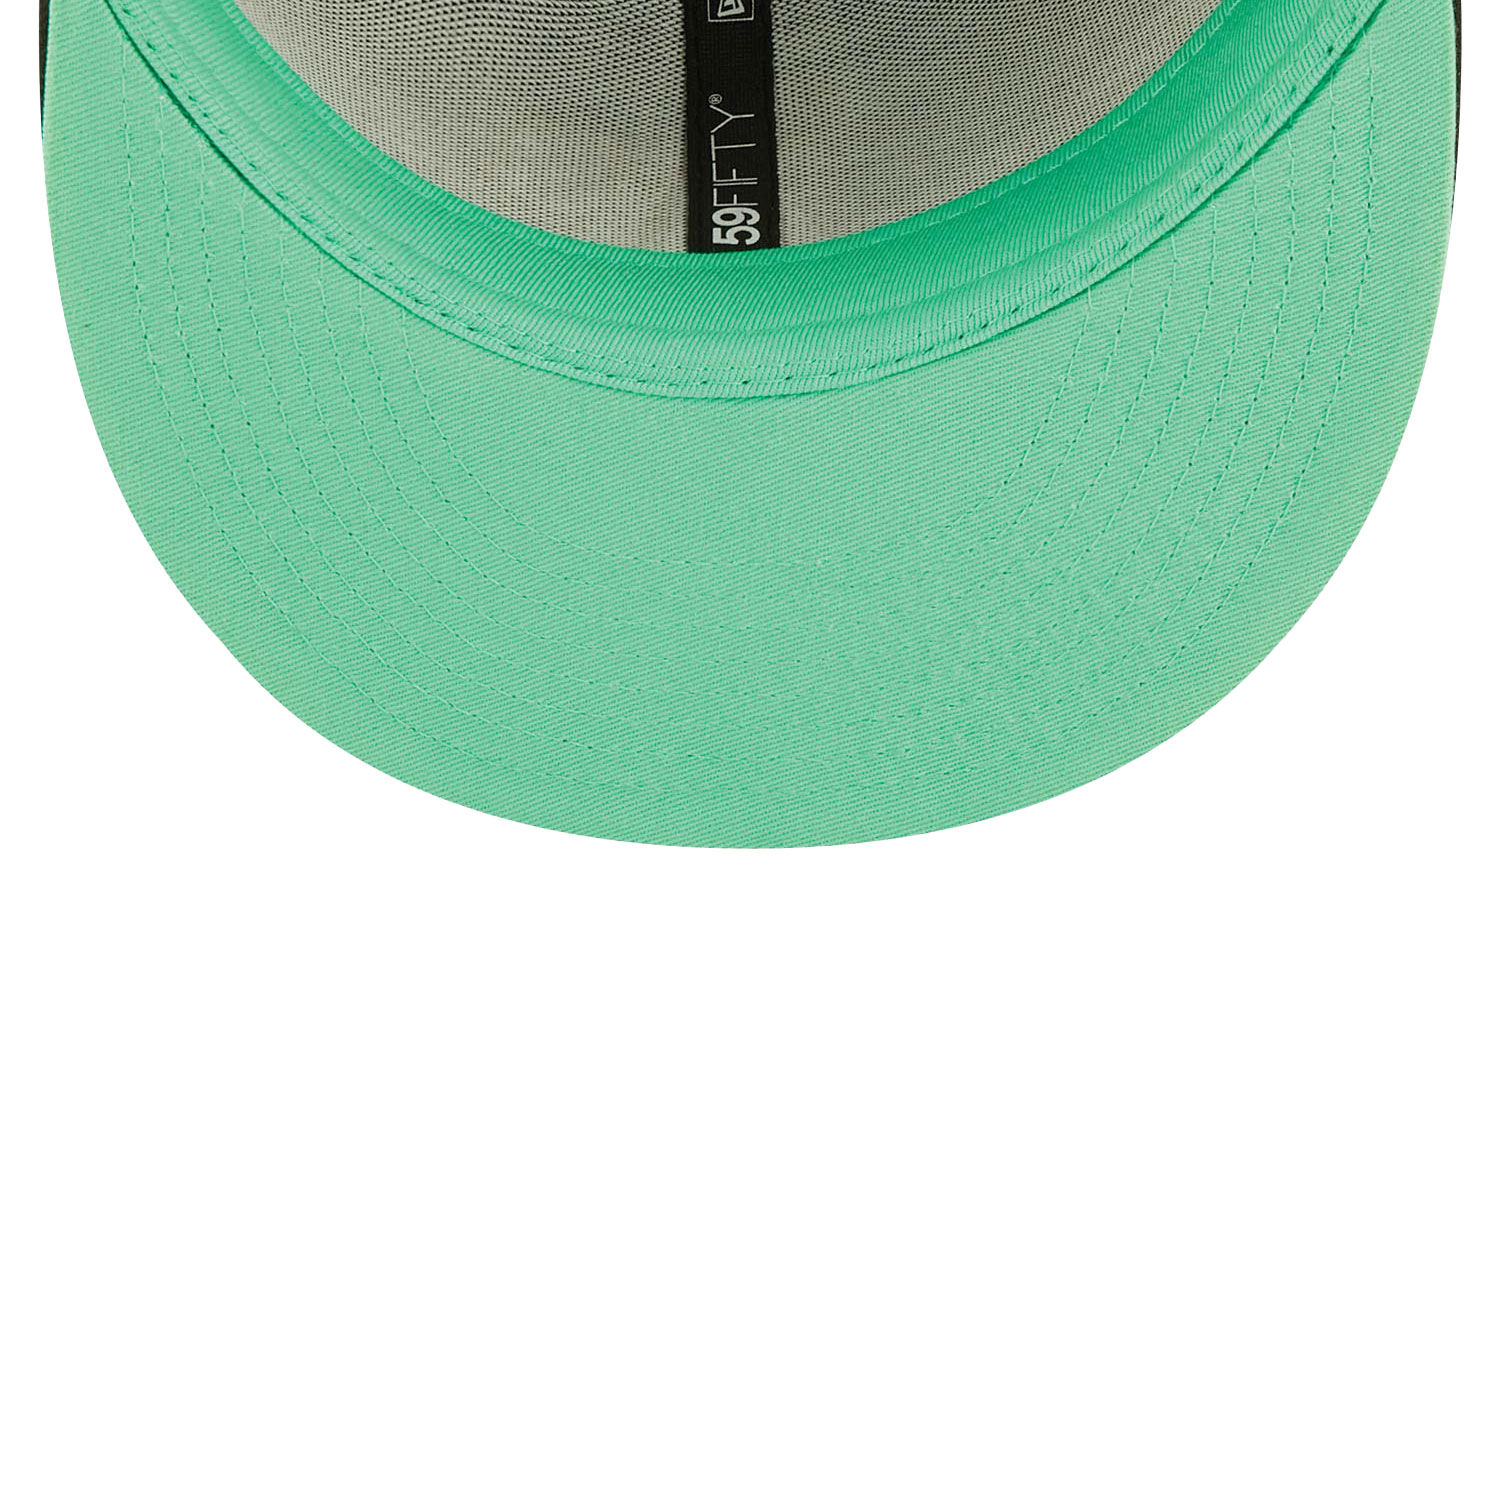 Cappellino 59FIFTY Fitted Oakland Athletics Citrus Pop Nero